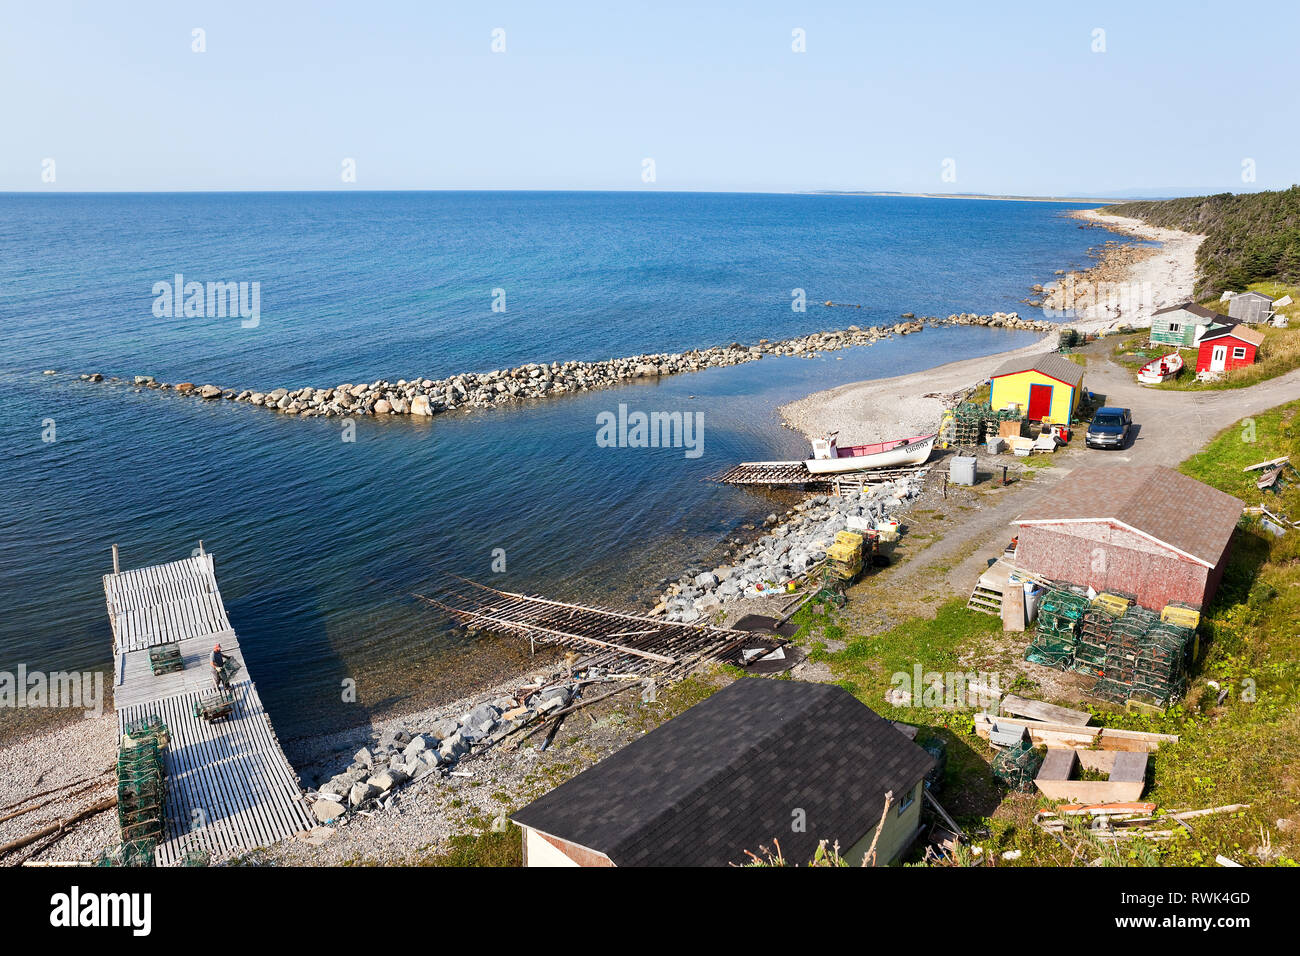 Artisanal fishing installation including a pier, slipways, sheds, cabins and fishing gear at Martin's Point, Western Newfoundland, Canada. The body of water in the background is the Gulf of St. Lawrence. Stock Photo